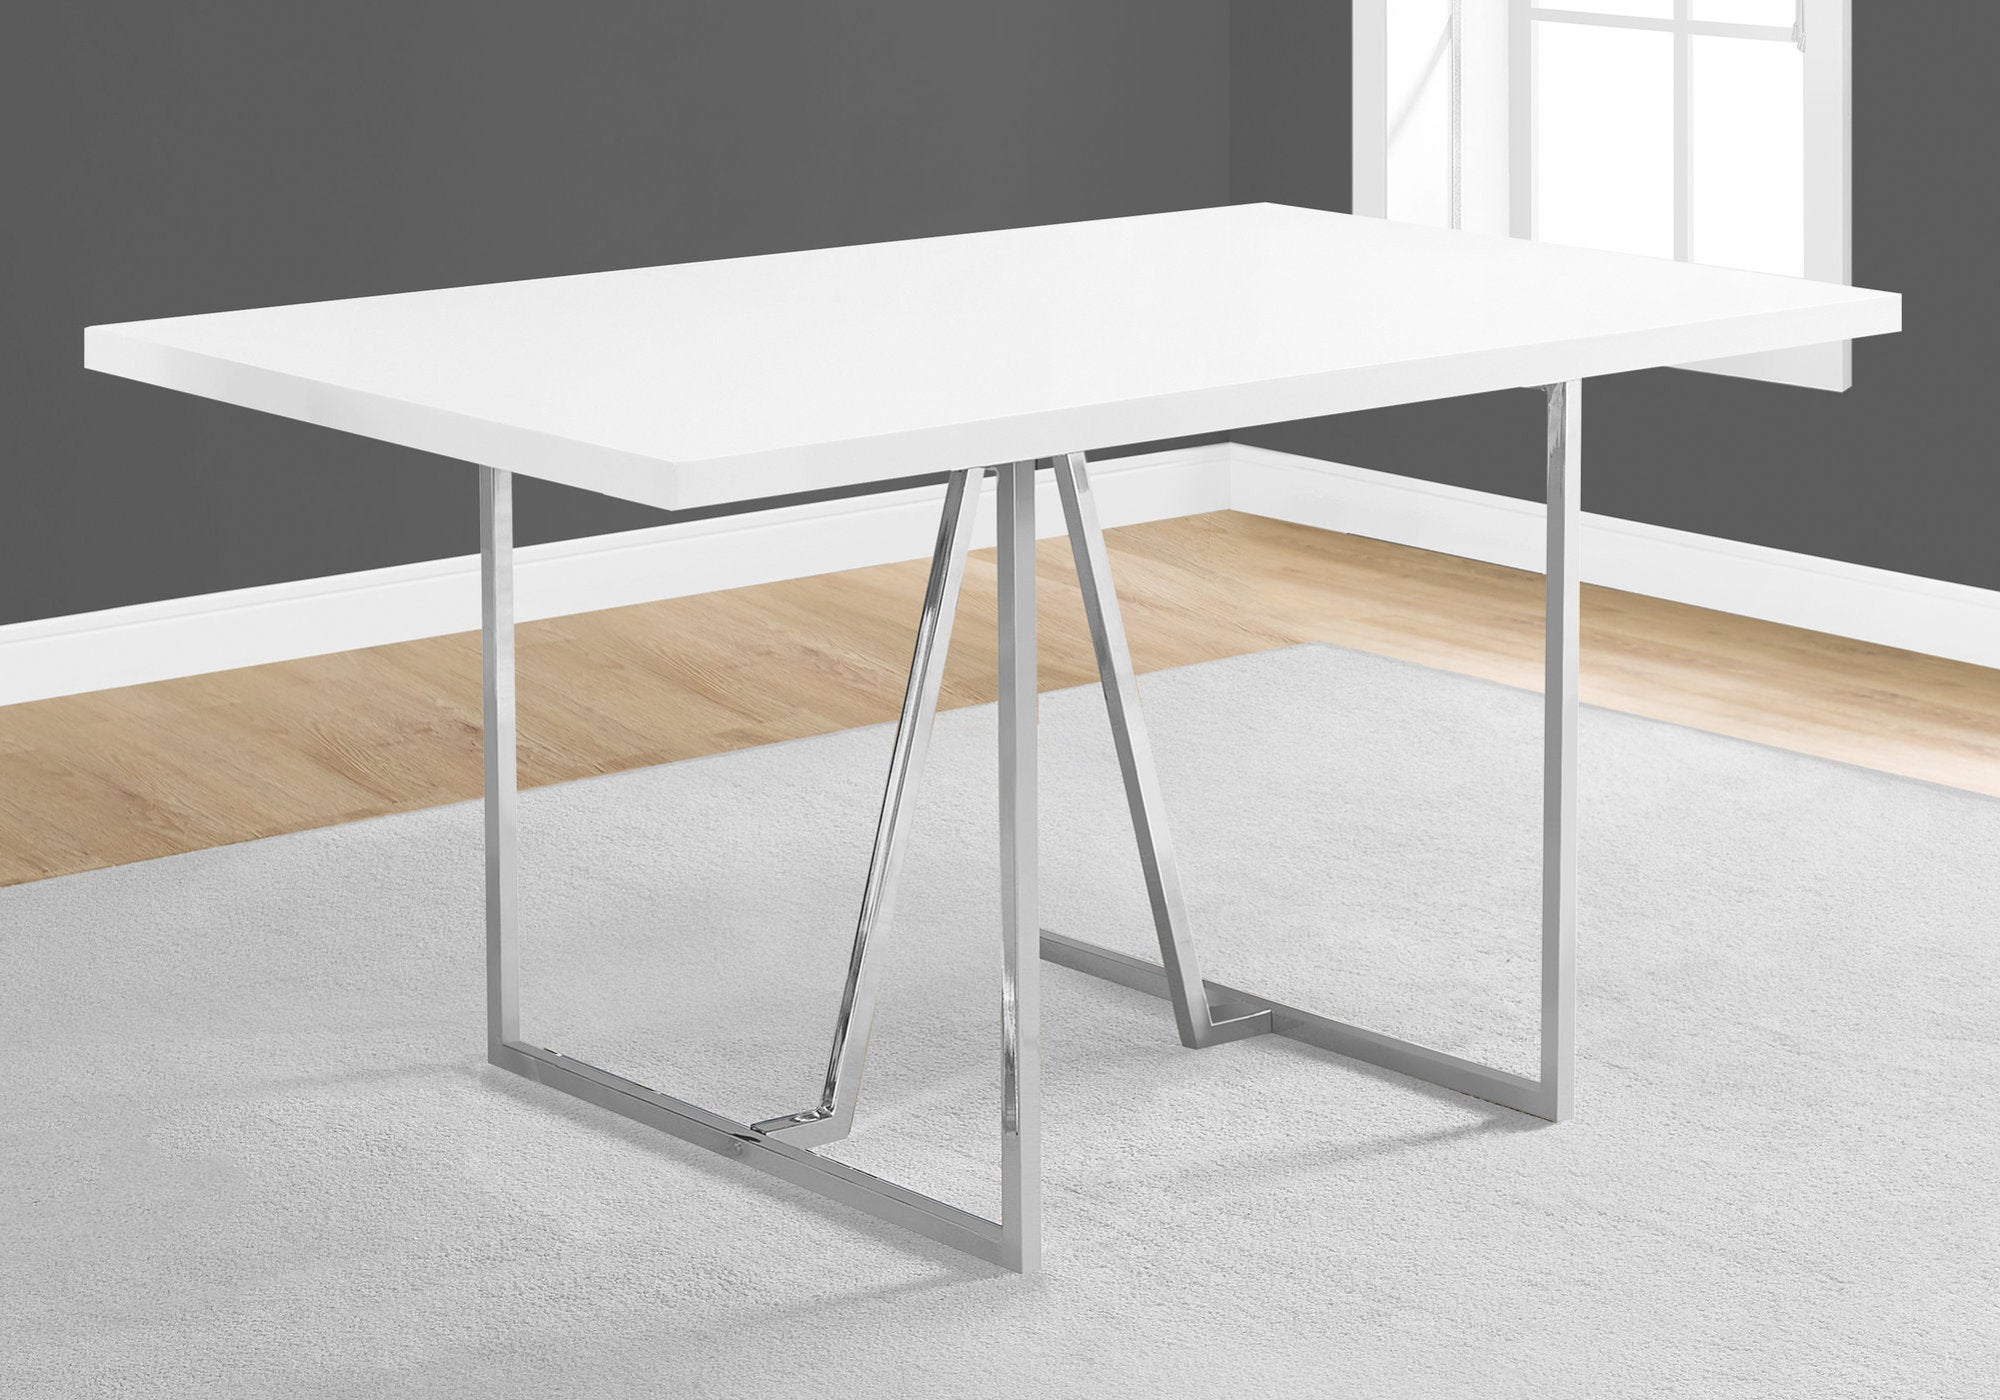 Modern Home Dining Table - 36"X 60" With U-Shaped Legs (White)